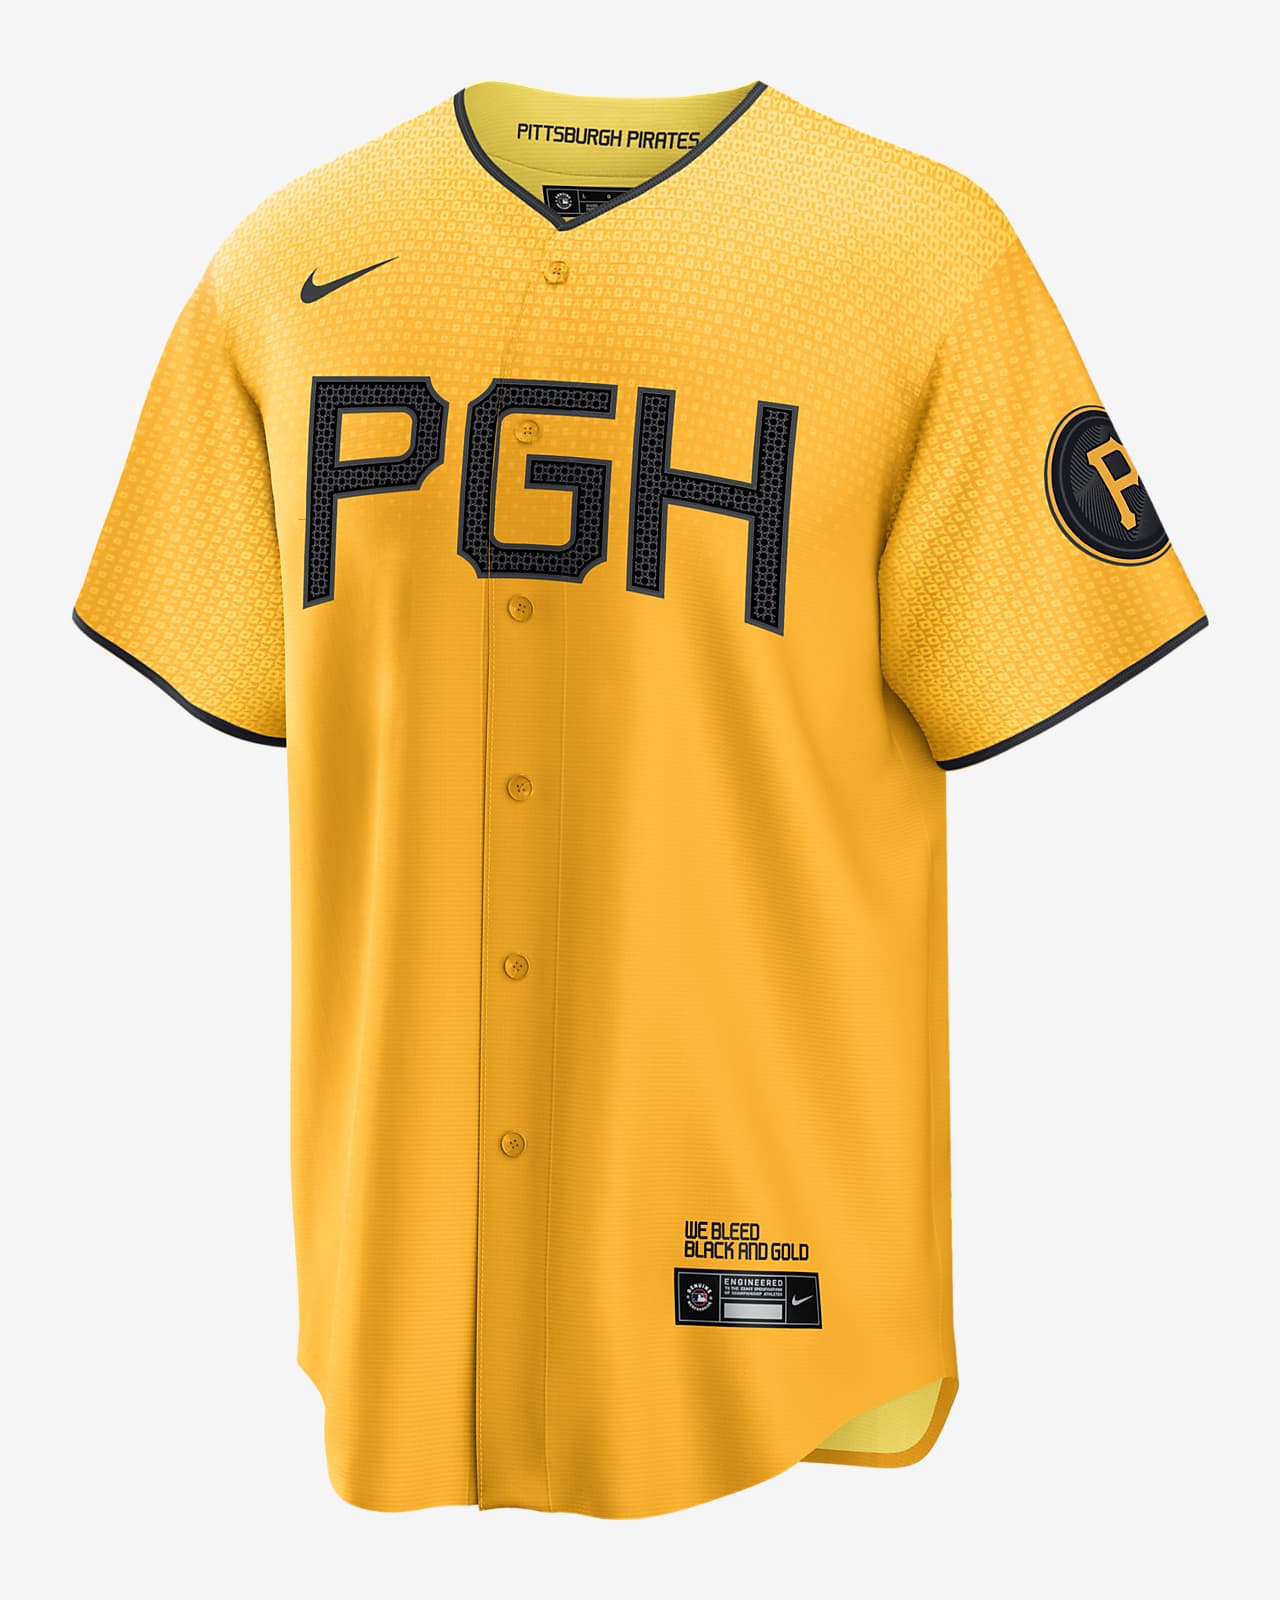 pittsburgh pirates all star jersey